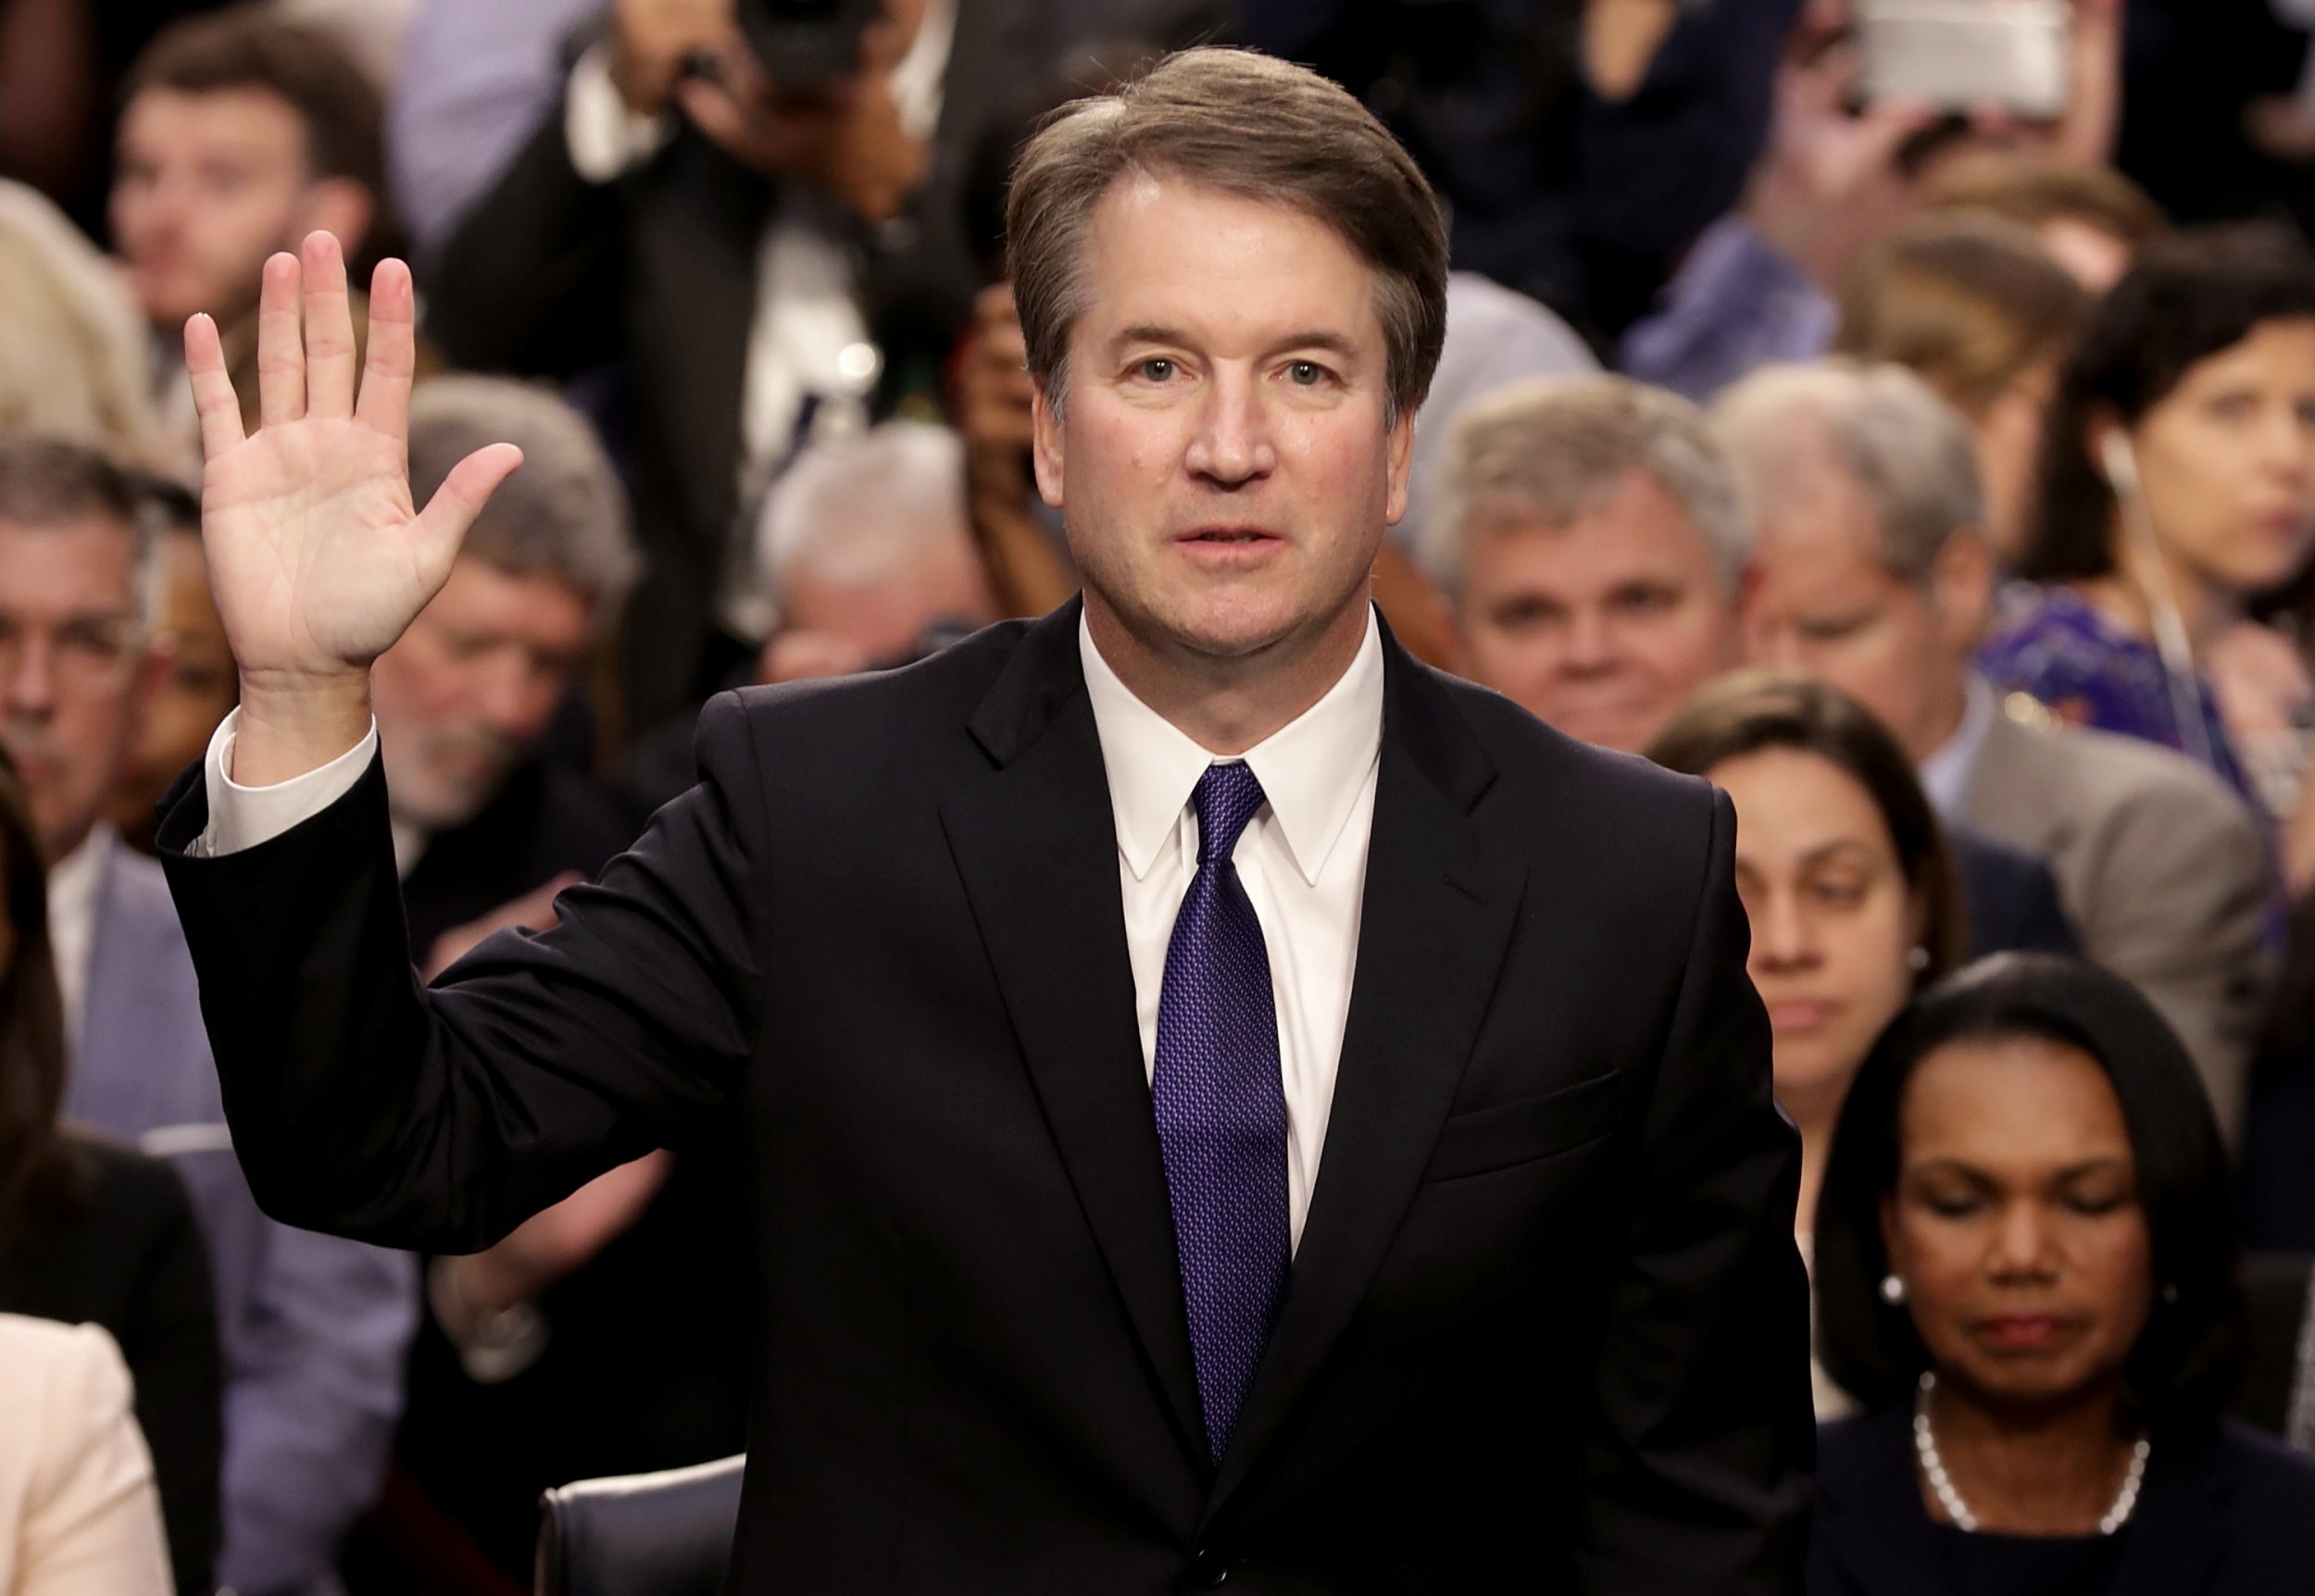 Brett Kavanaugh Won #39 t Say Whether Trump Should Have to Obey Subpoena